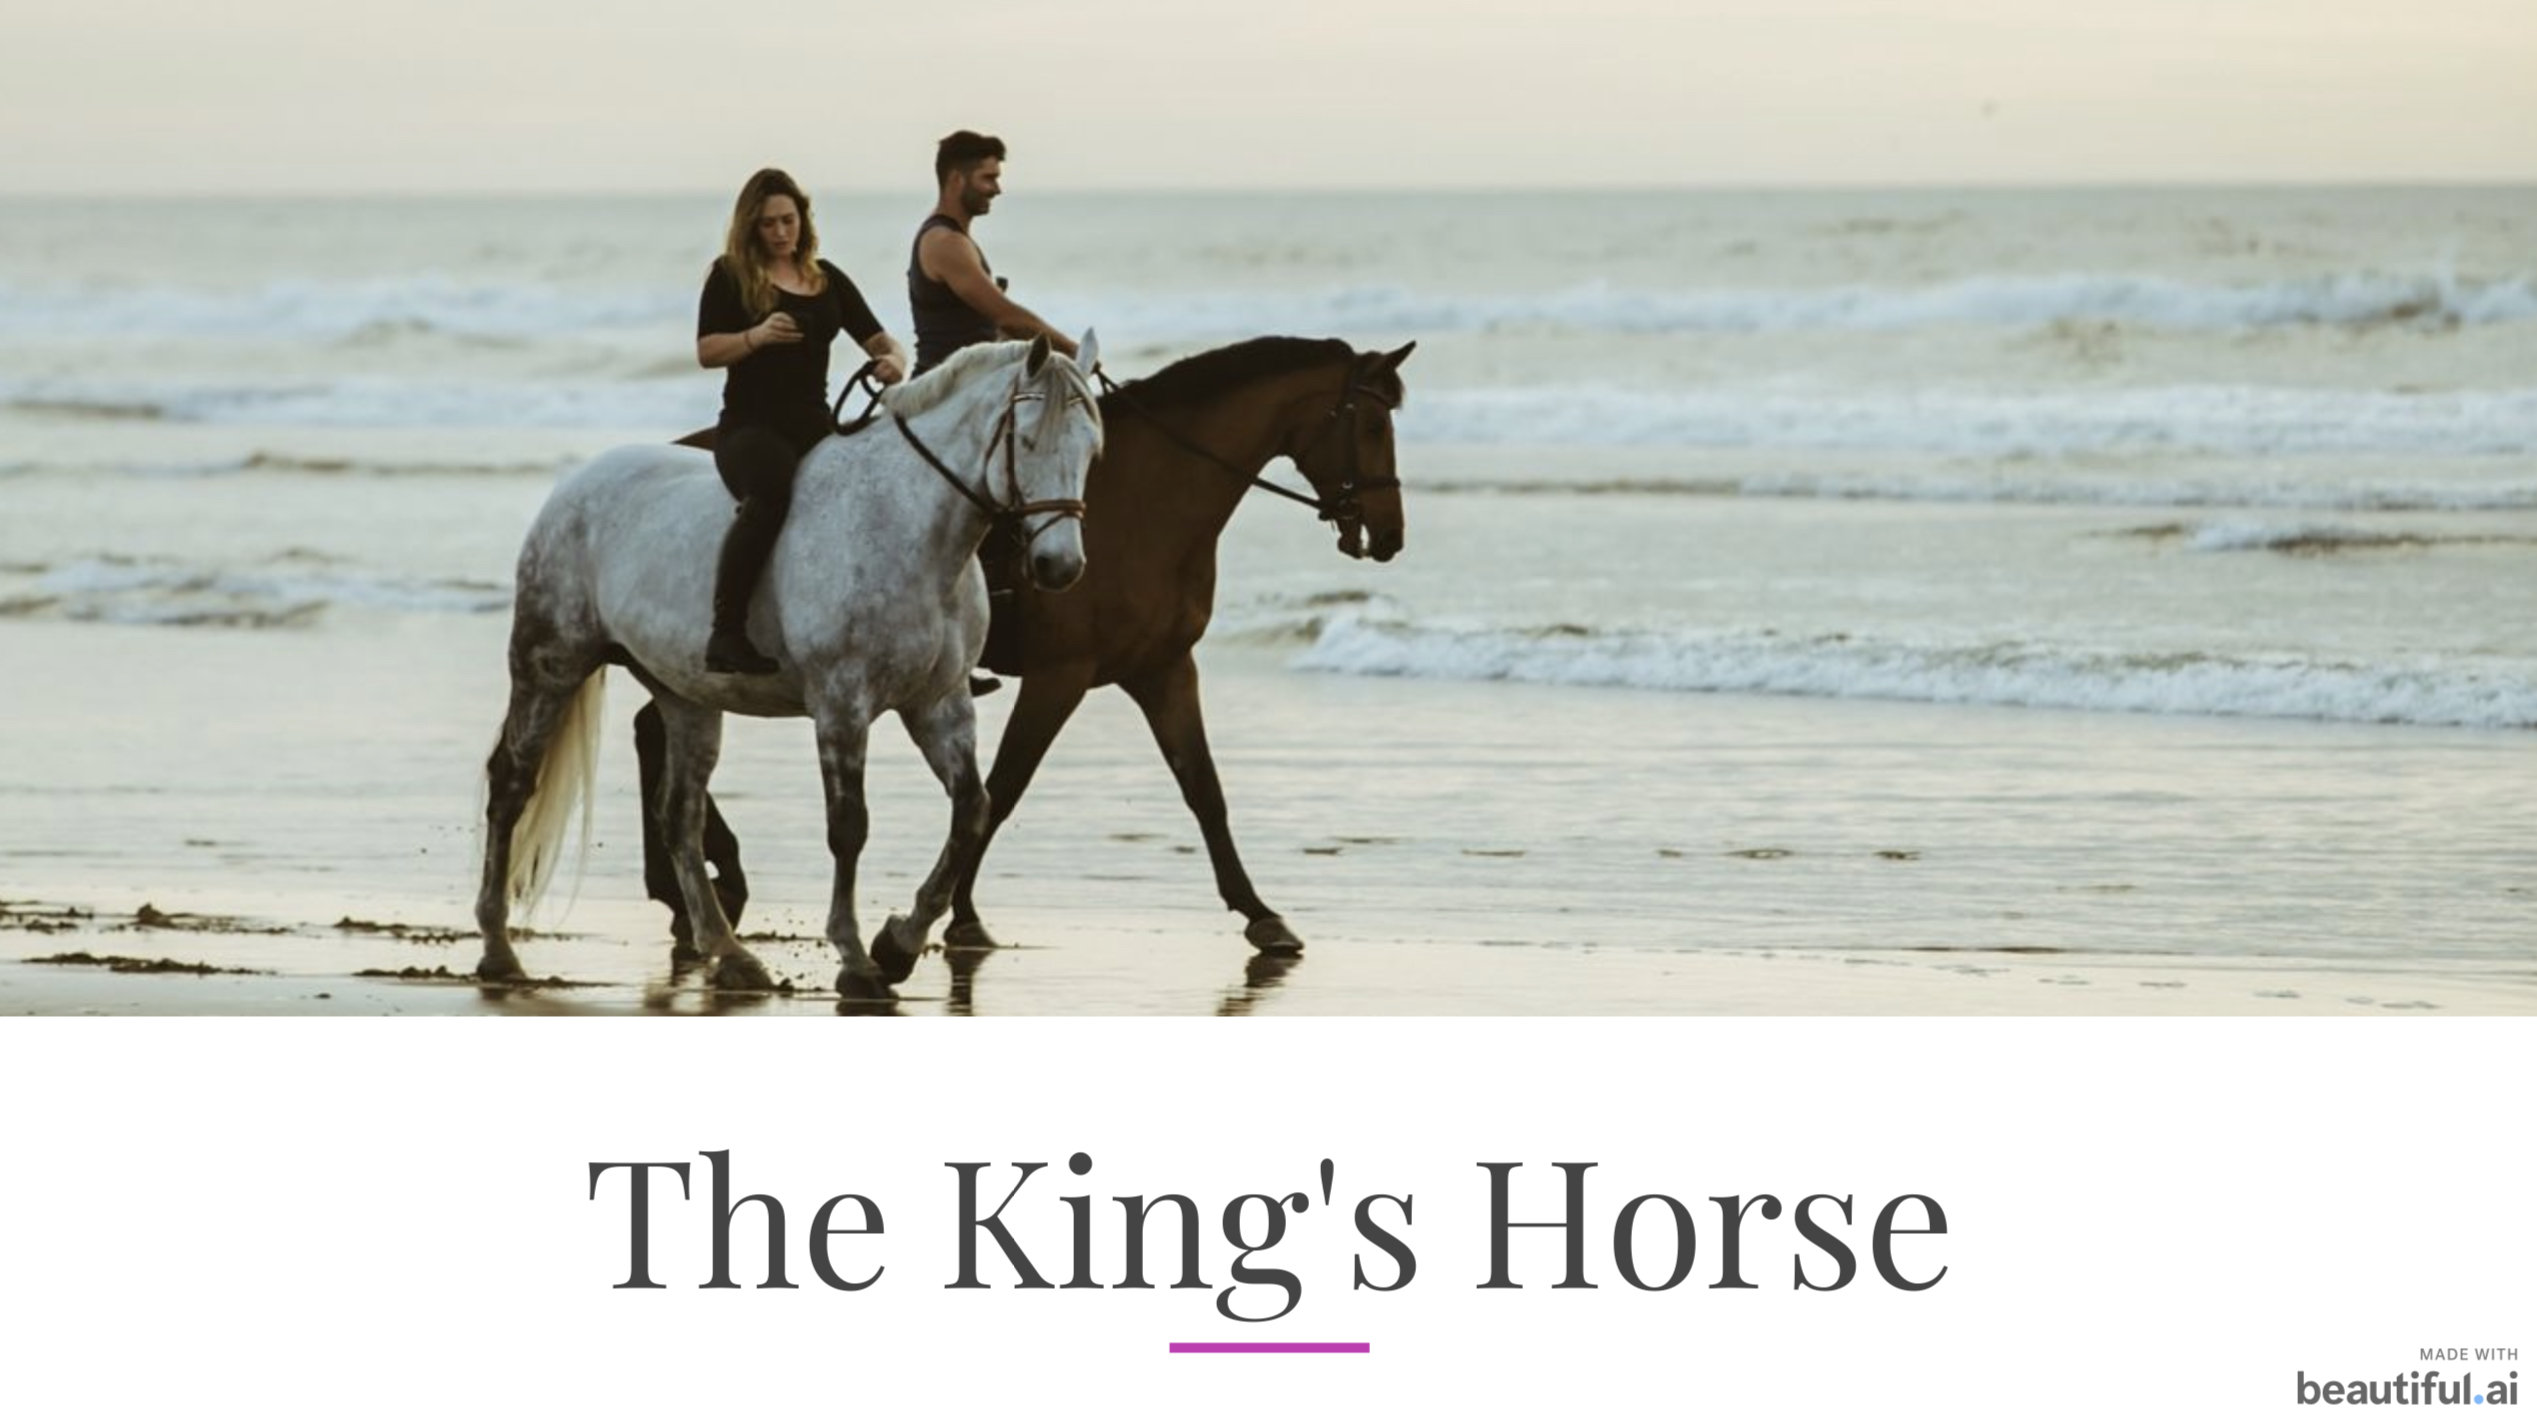 THE KING'S HORSE